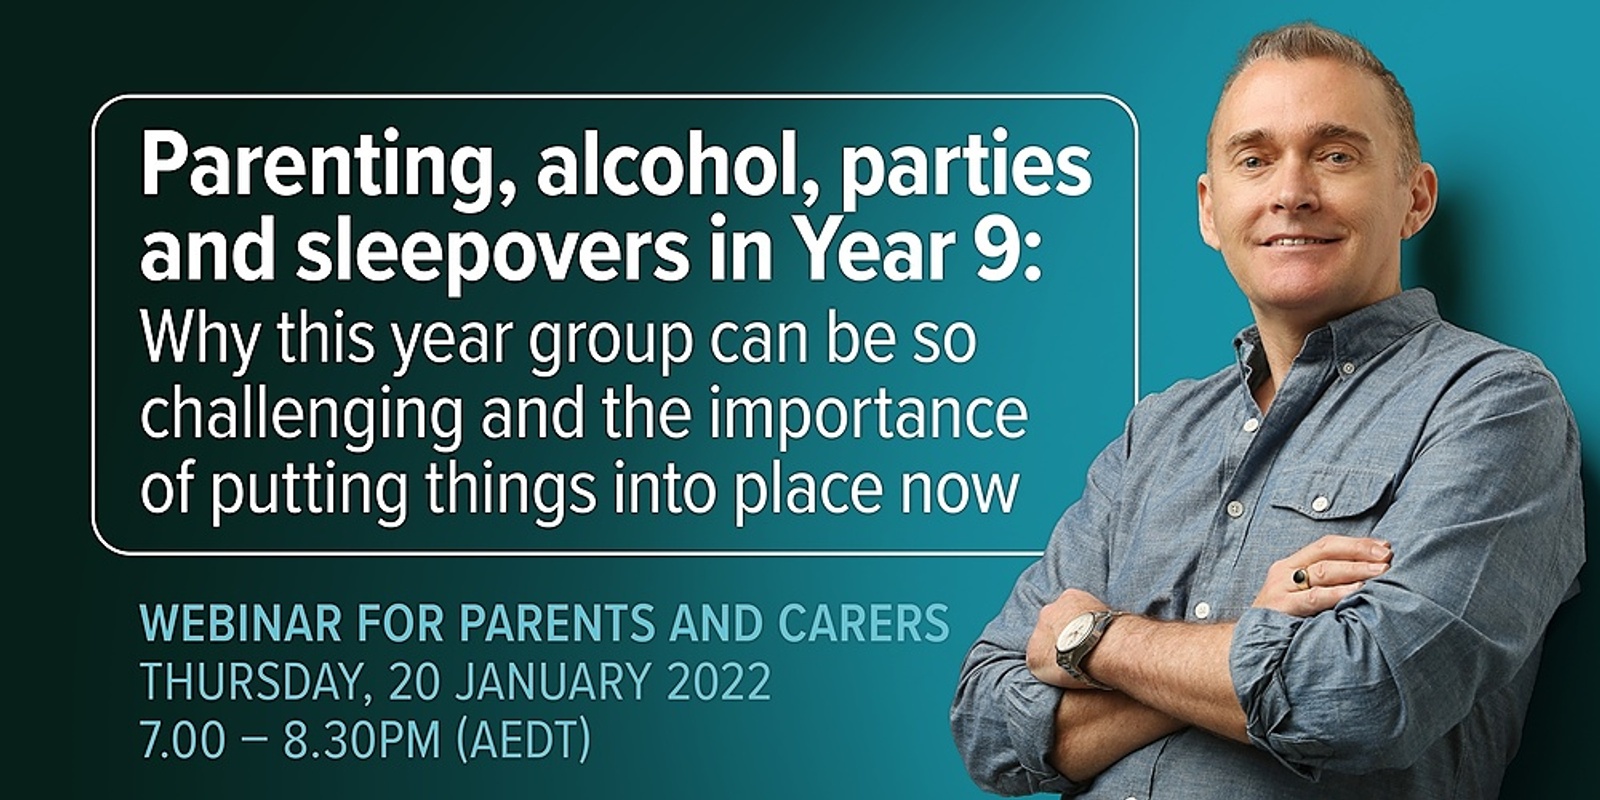 Banner image for Parenting, alcohol, parties and sleepovers in Year 9